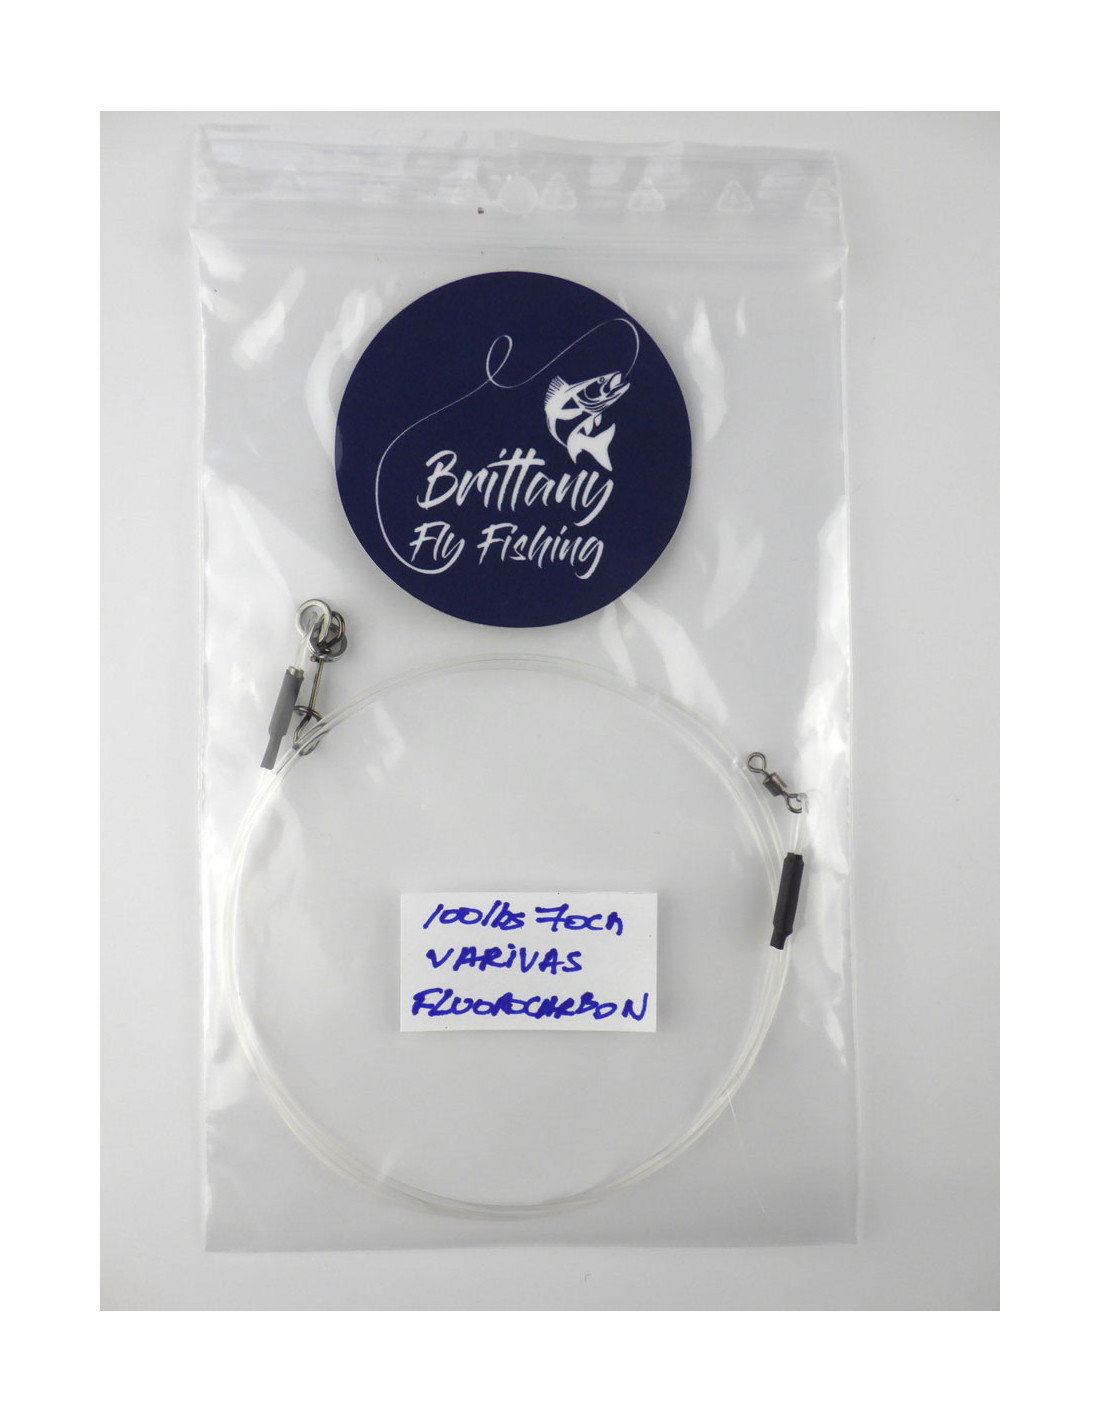 Brittany Fly Fishing™ 70 cm Varivas fluorocarbon Quick Snap pike